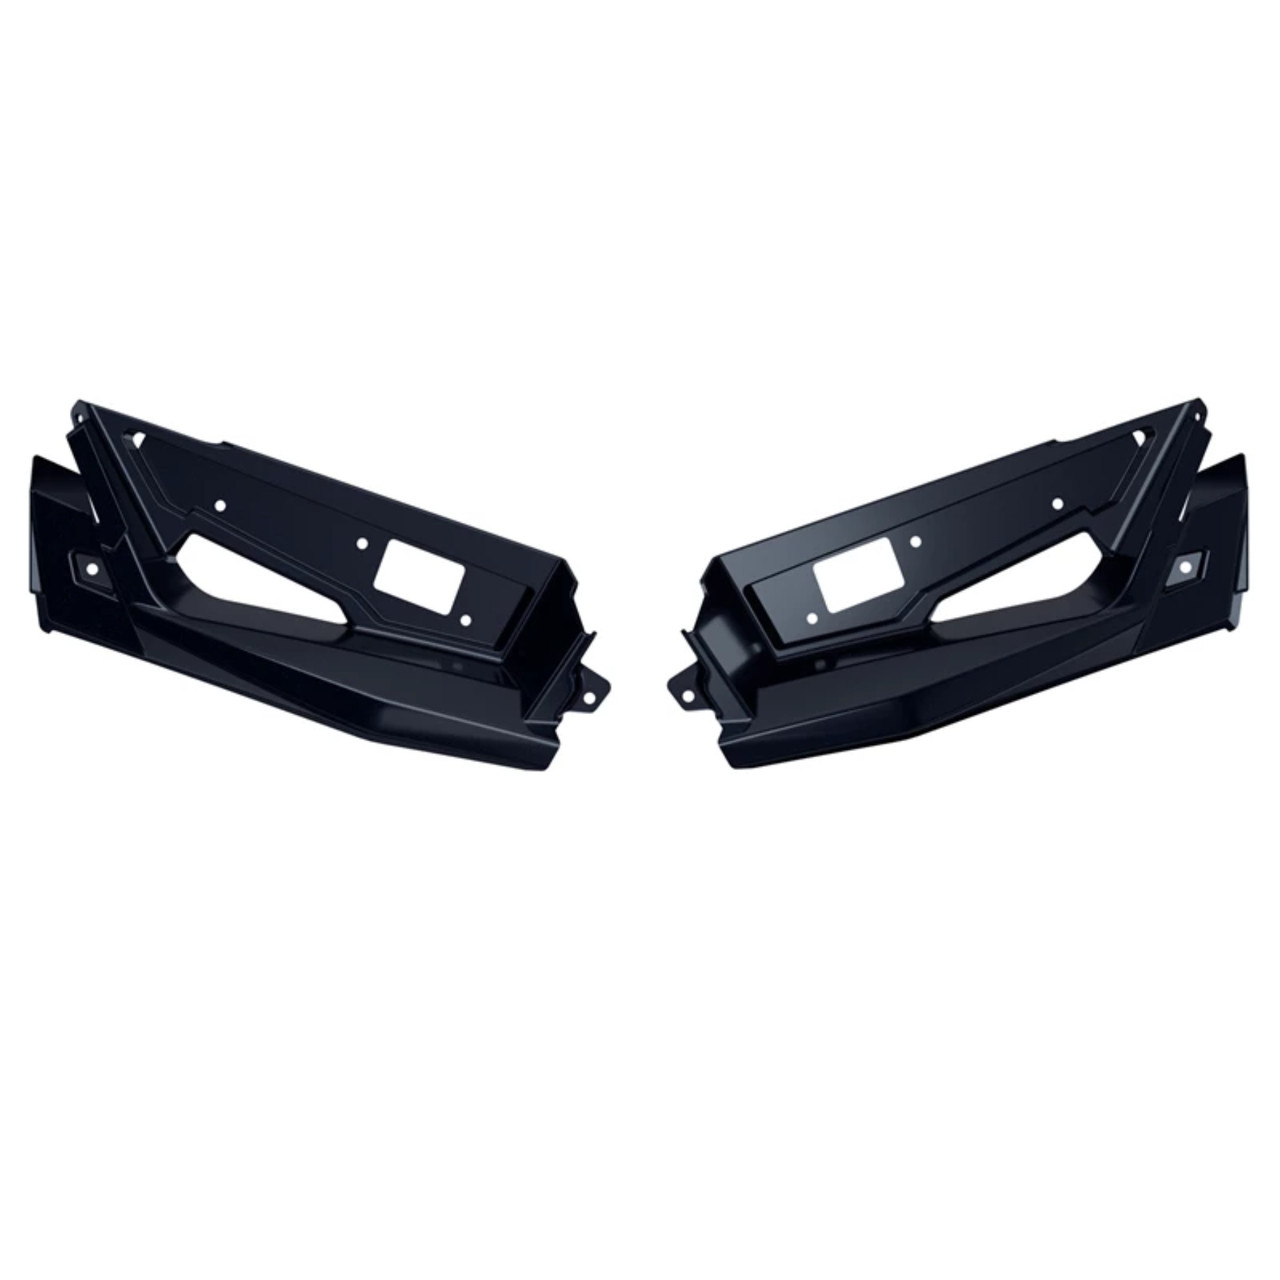 Polaris New OEM Azure Crystal Painted Front Upper Accent Panel, 2884604-809